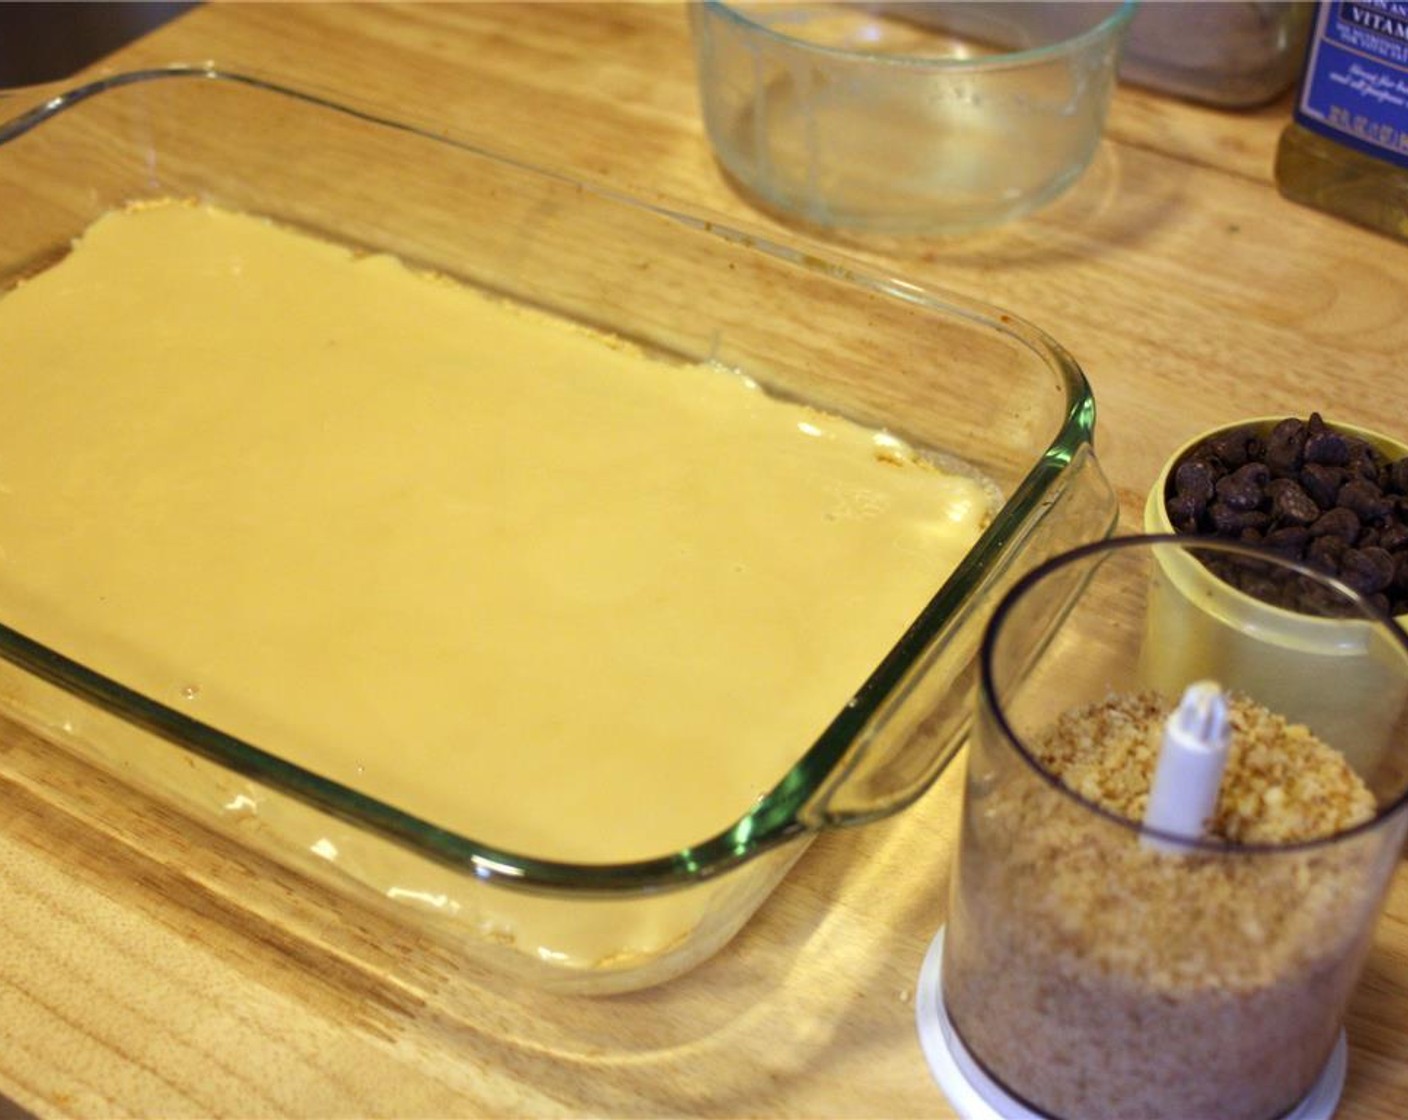 step 5 Pour the Sweetened Condensed Milk (1 1/3 cups) over top the graham cracker crumbs, again make sure you distribute evenly. Going slow here is important so that you get a nice, even coating.